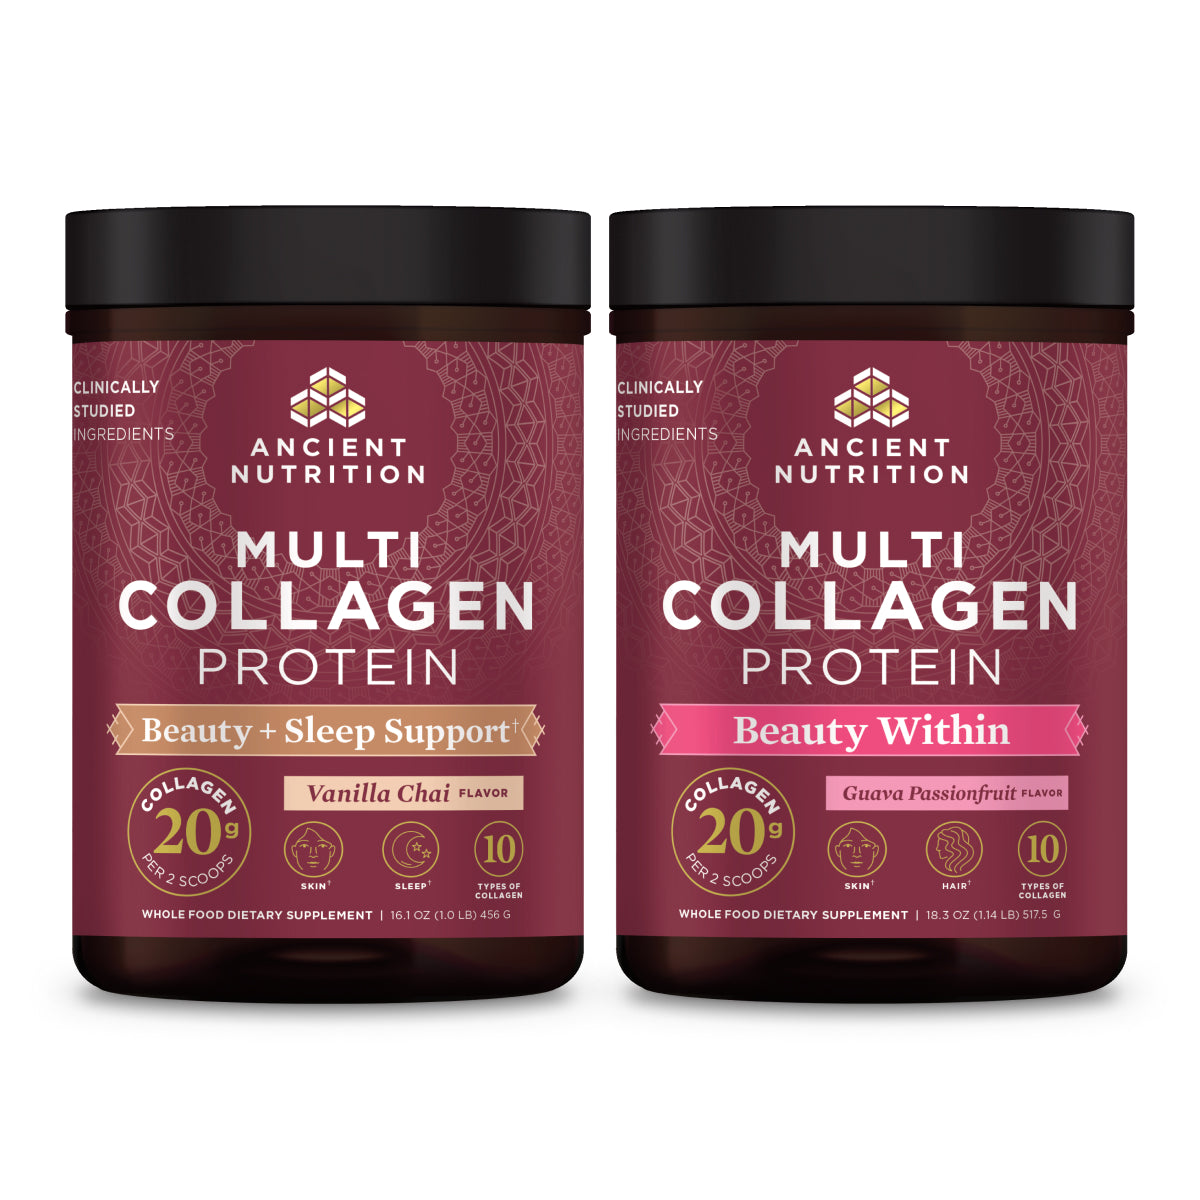 multi collagen beauty sleep support and beauty within